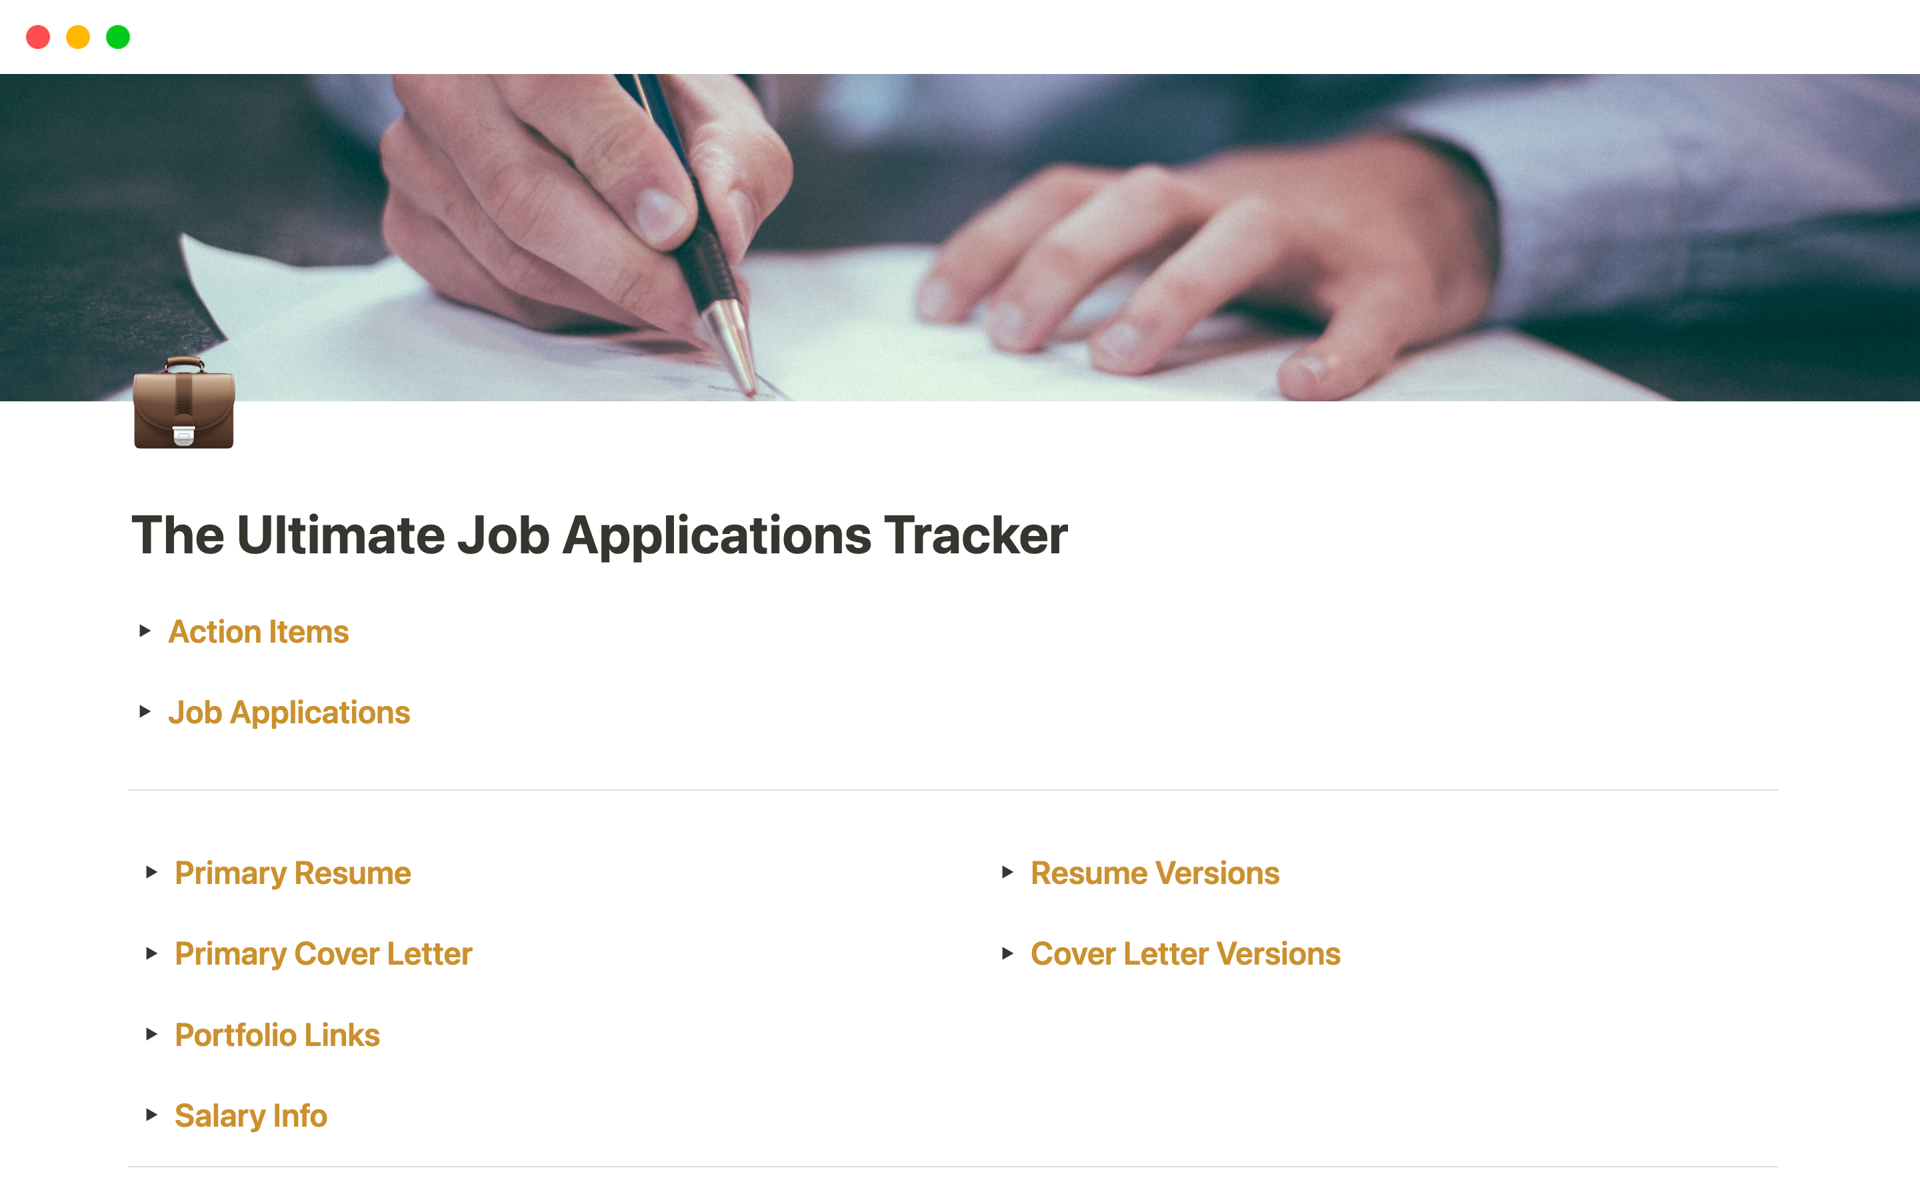 The Ultimate Job Applications Tracker is a simple and easy-to-use Notion template for managing all your job applications, resumes, cover letters, and portfolio links in one place to help you find your next dream job!